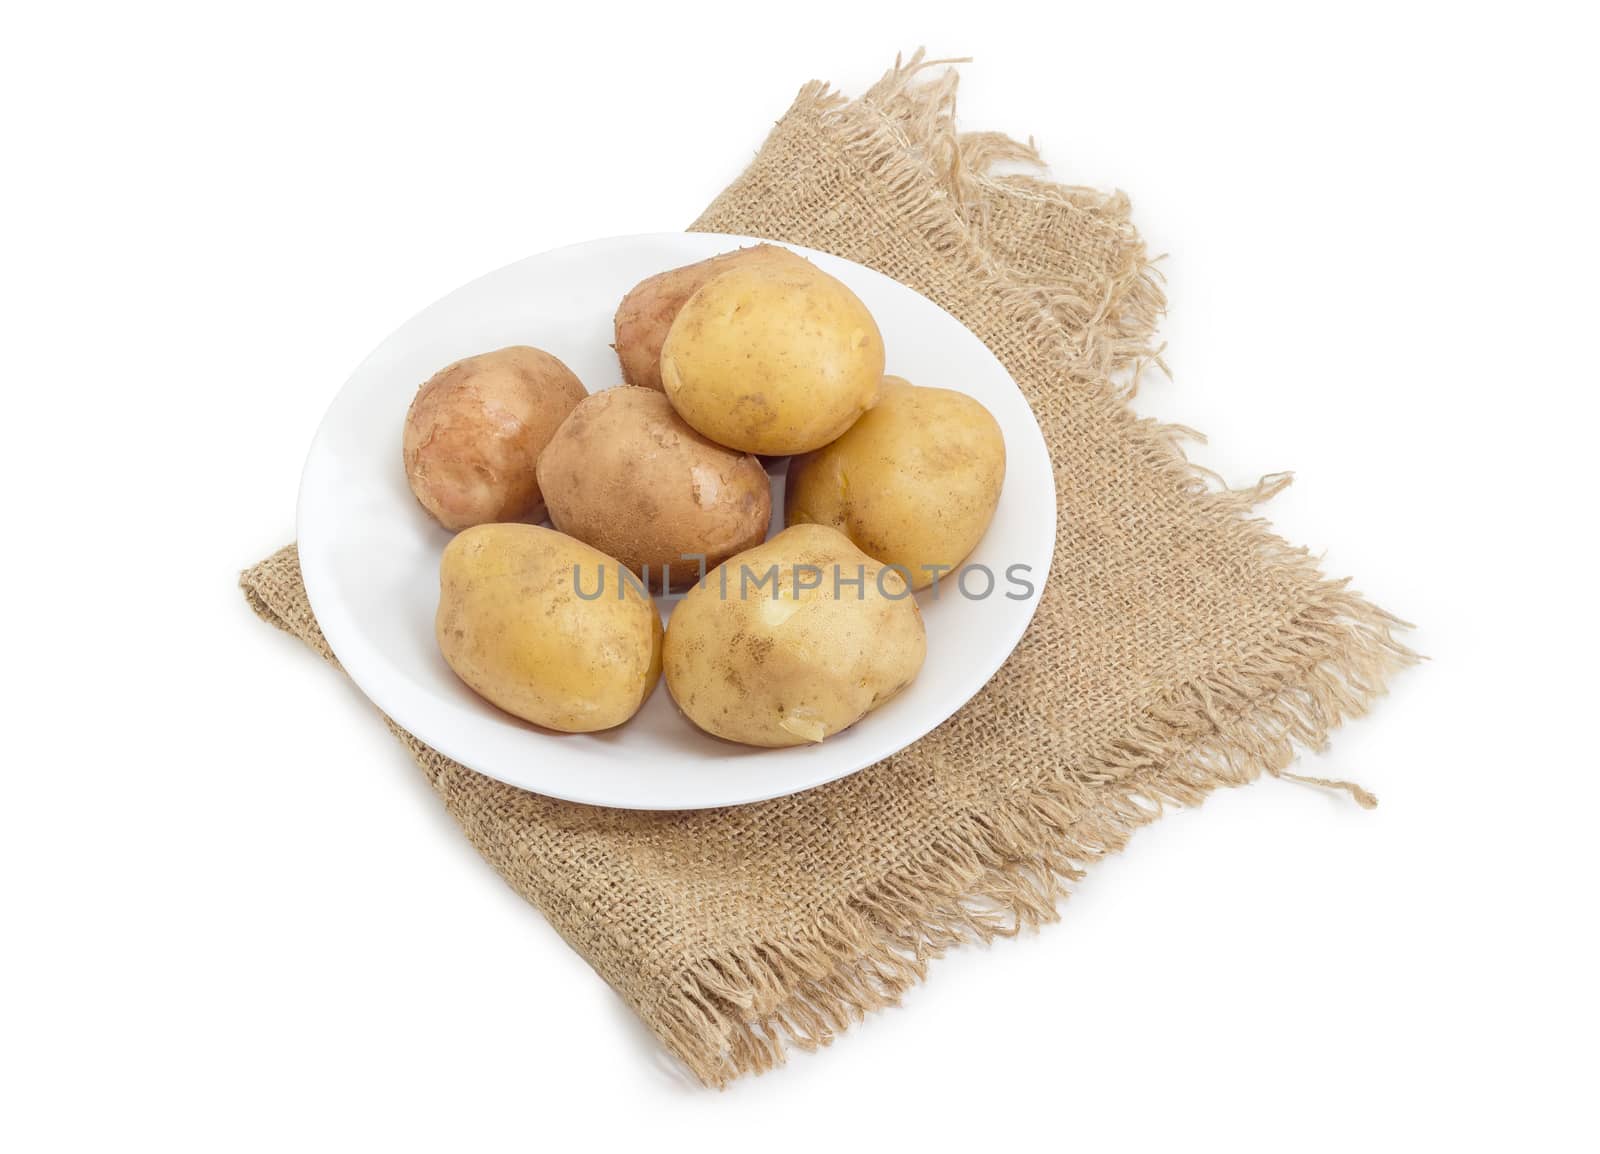 Several whole potatoes boiled in their jackets on the white dish on a sackcloth on a white background
